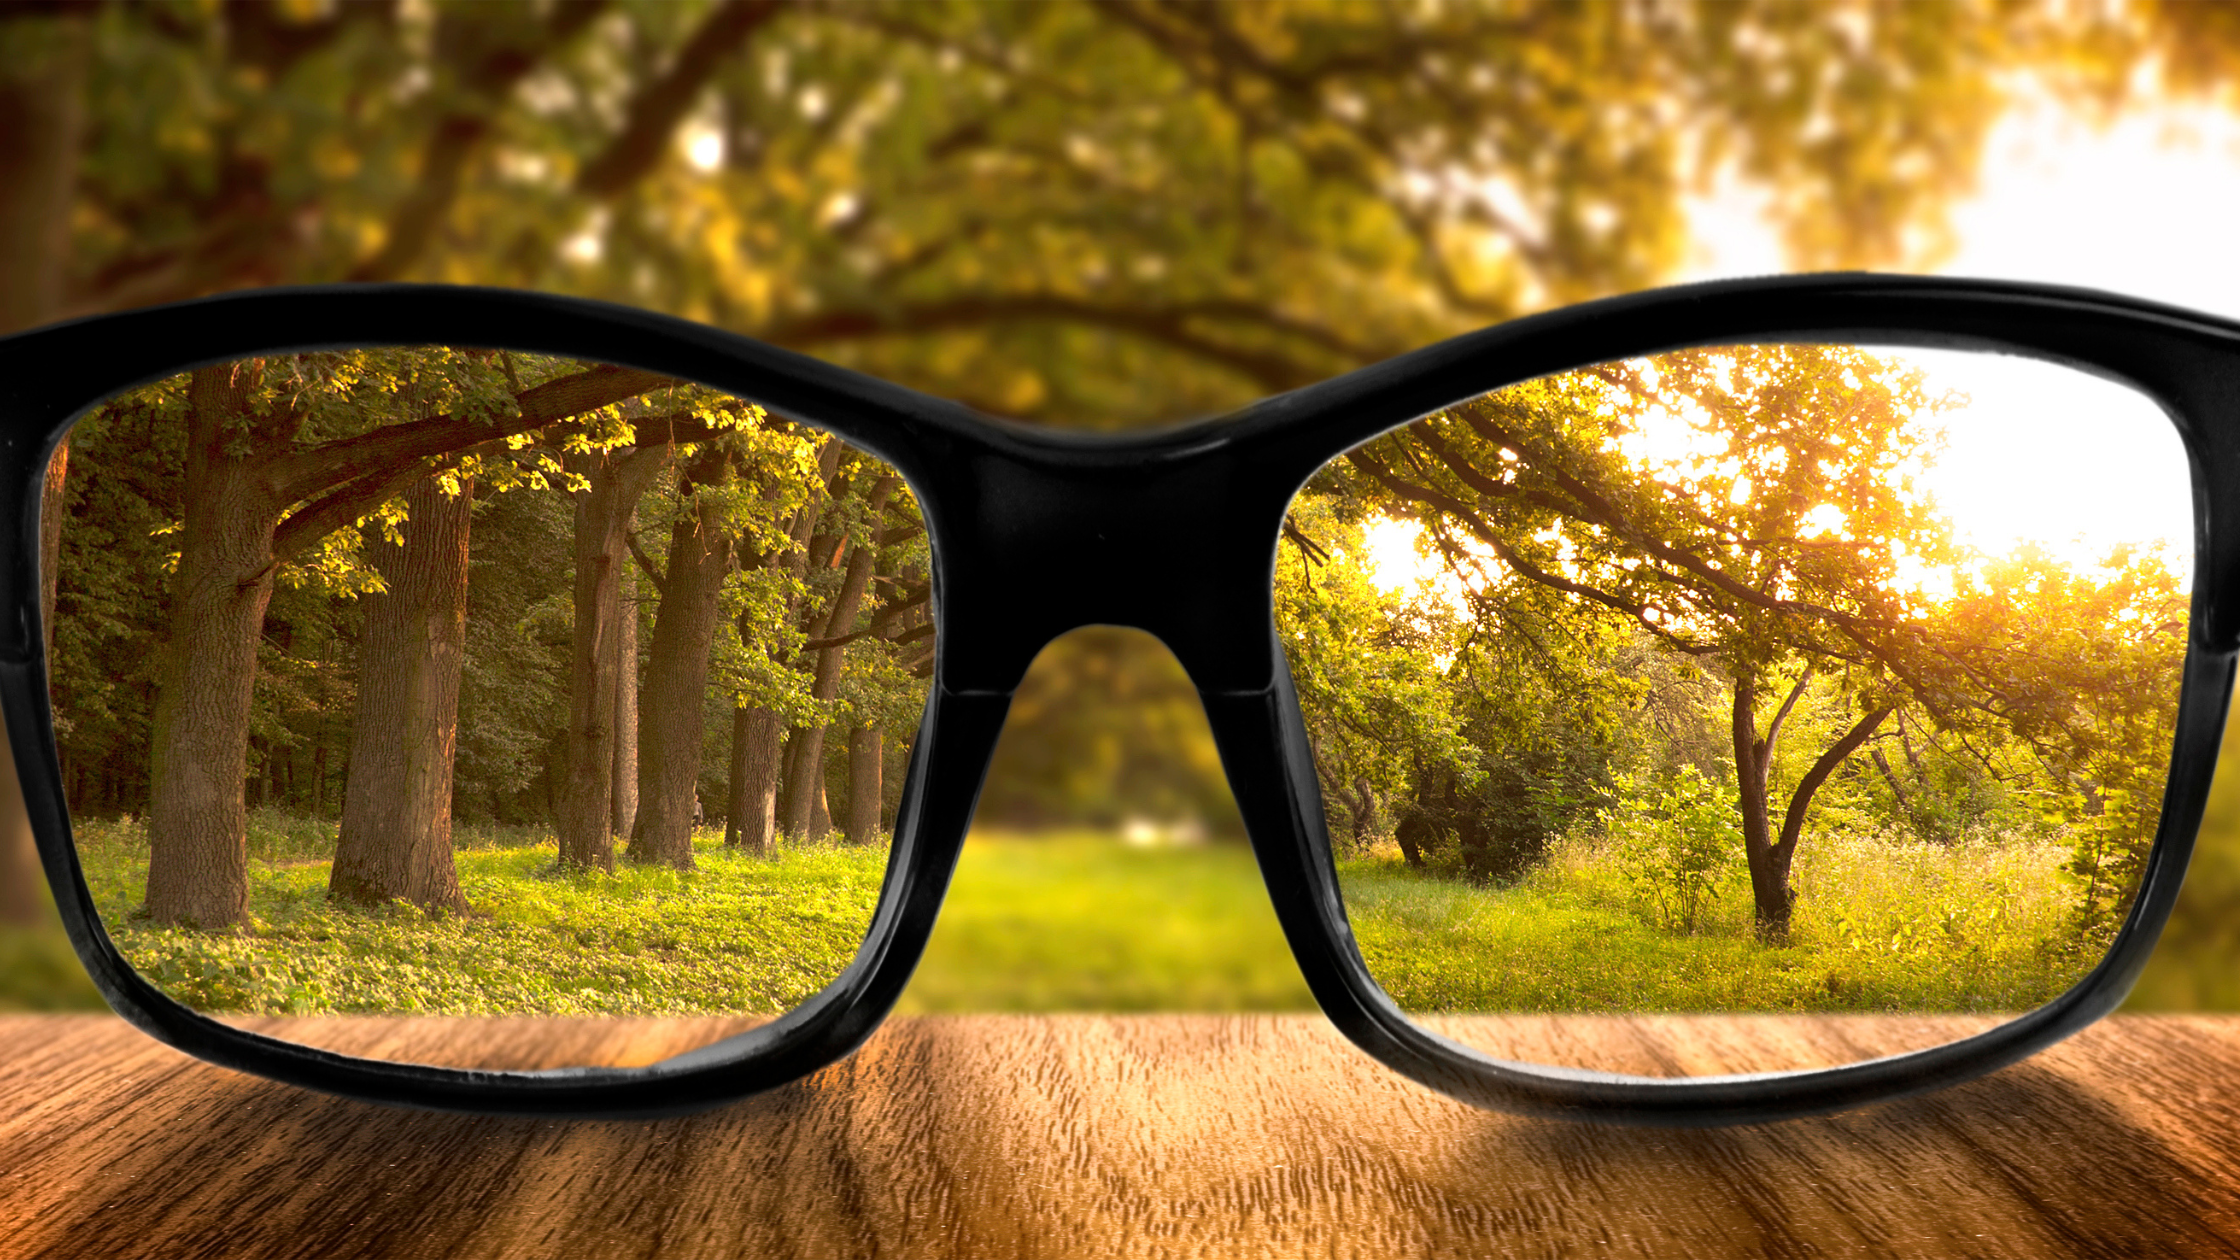 pair of eyeglasses on a wooden table, with trees in focus through the lenses